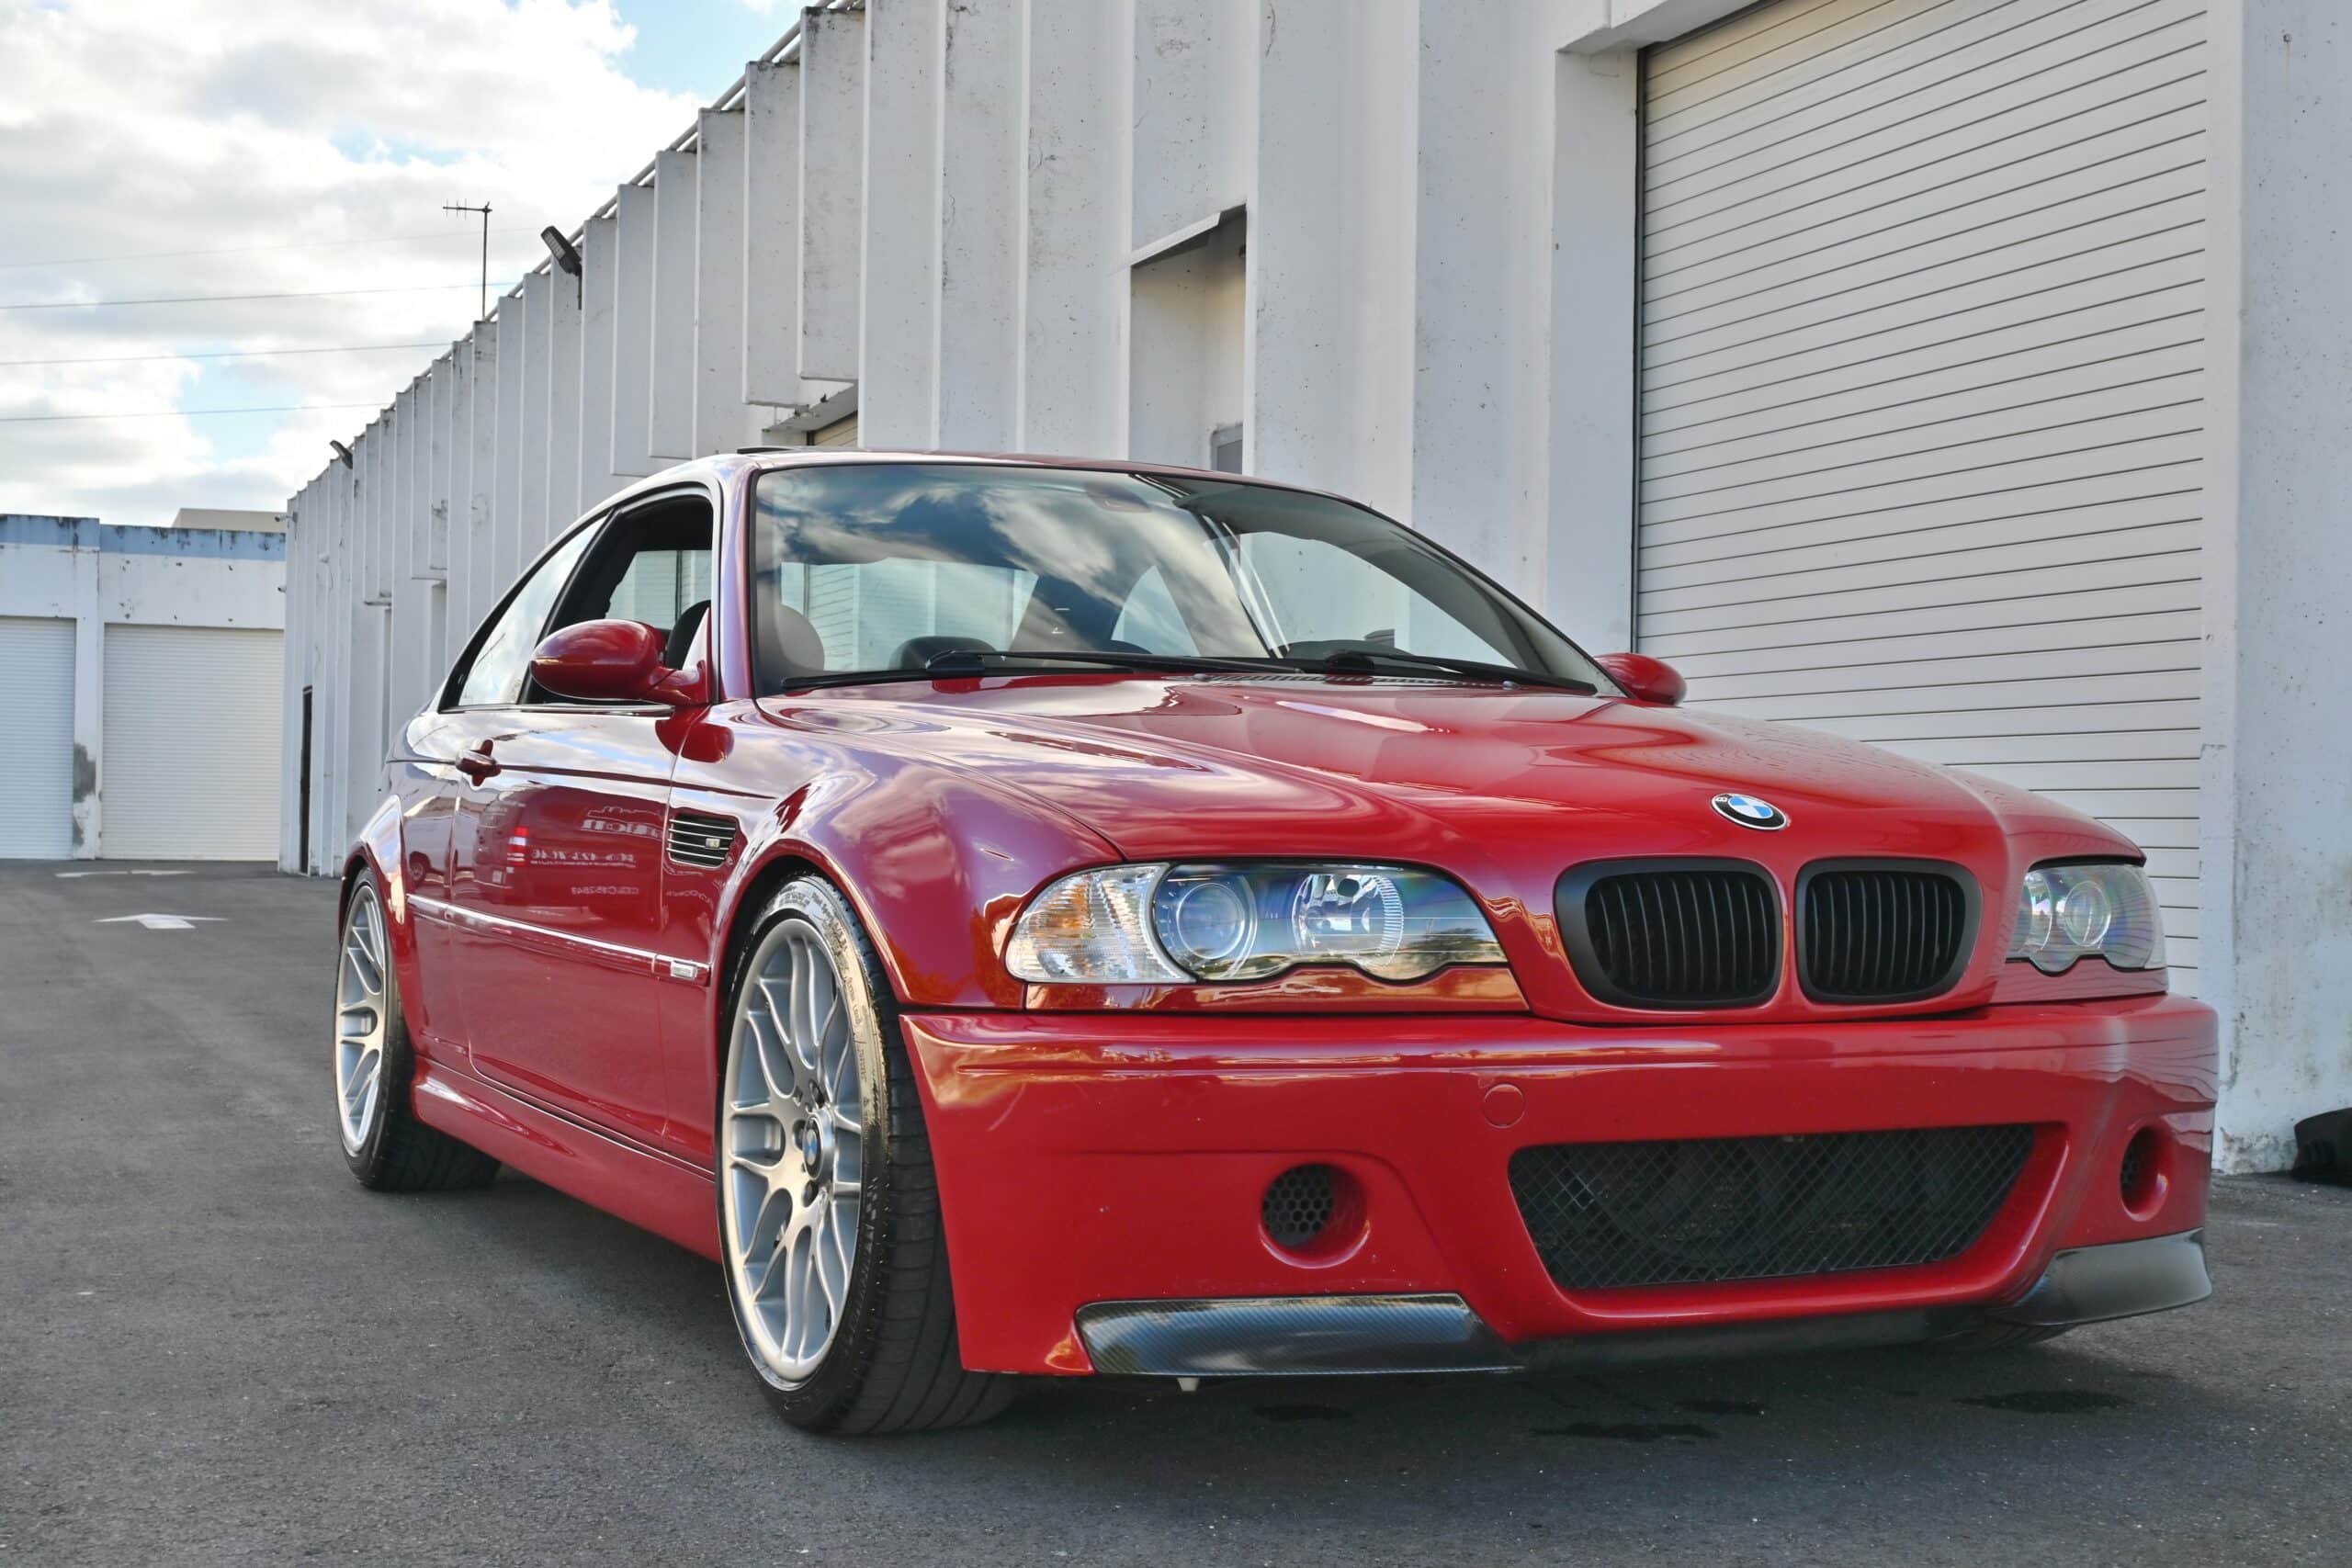 2005 BMW M3 E46 6 Manual Red/ OEM ZCP Wheels / 88K Miles / Enthusiast Owned -Meticulously - RMCMiami